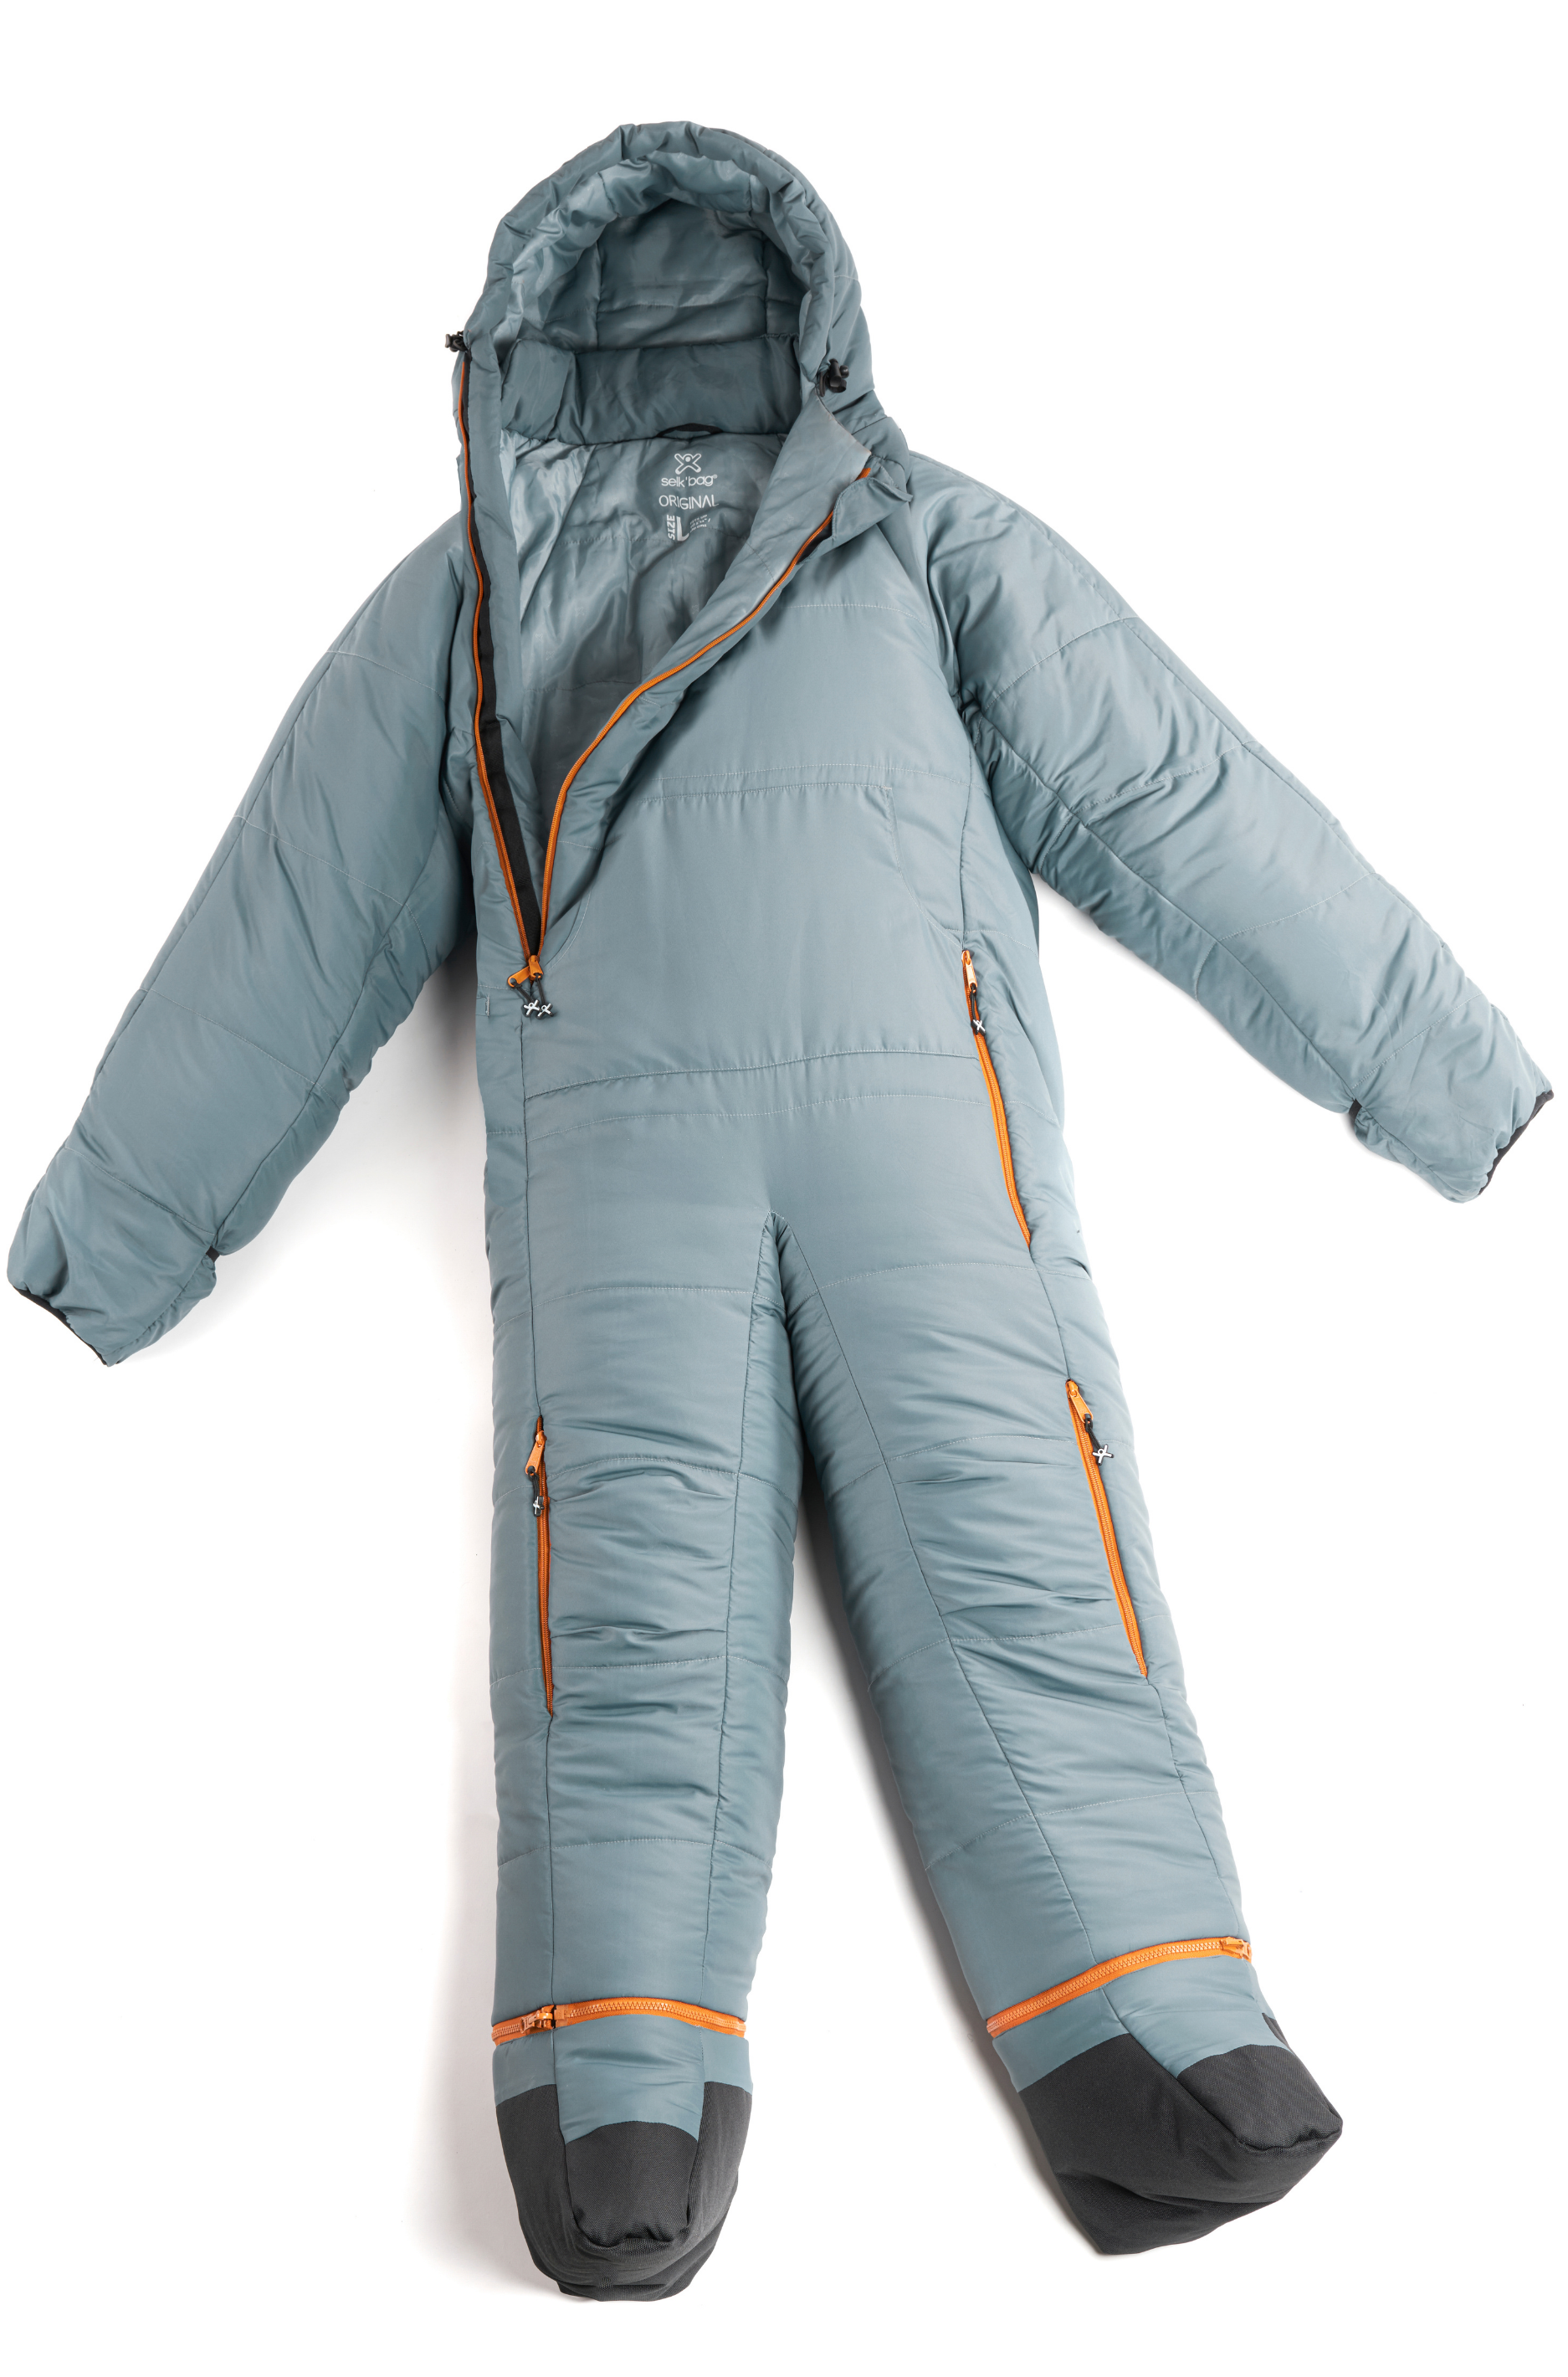 Selk'bag review: This Wearable Sleeping Bag Is a Dream in Cold